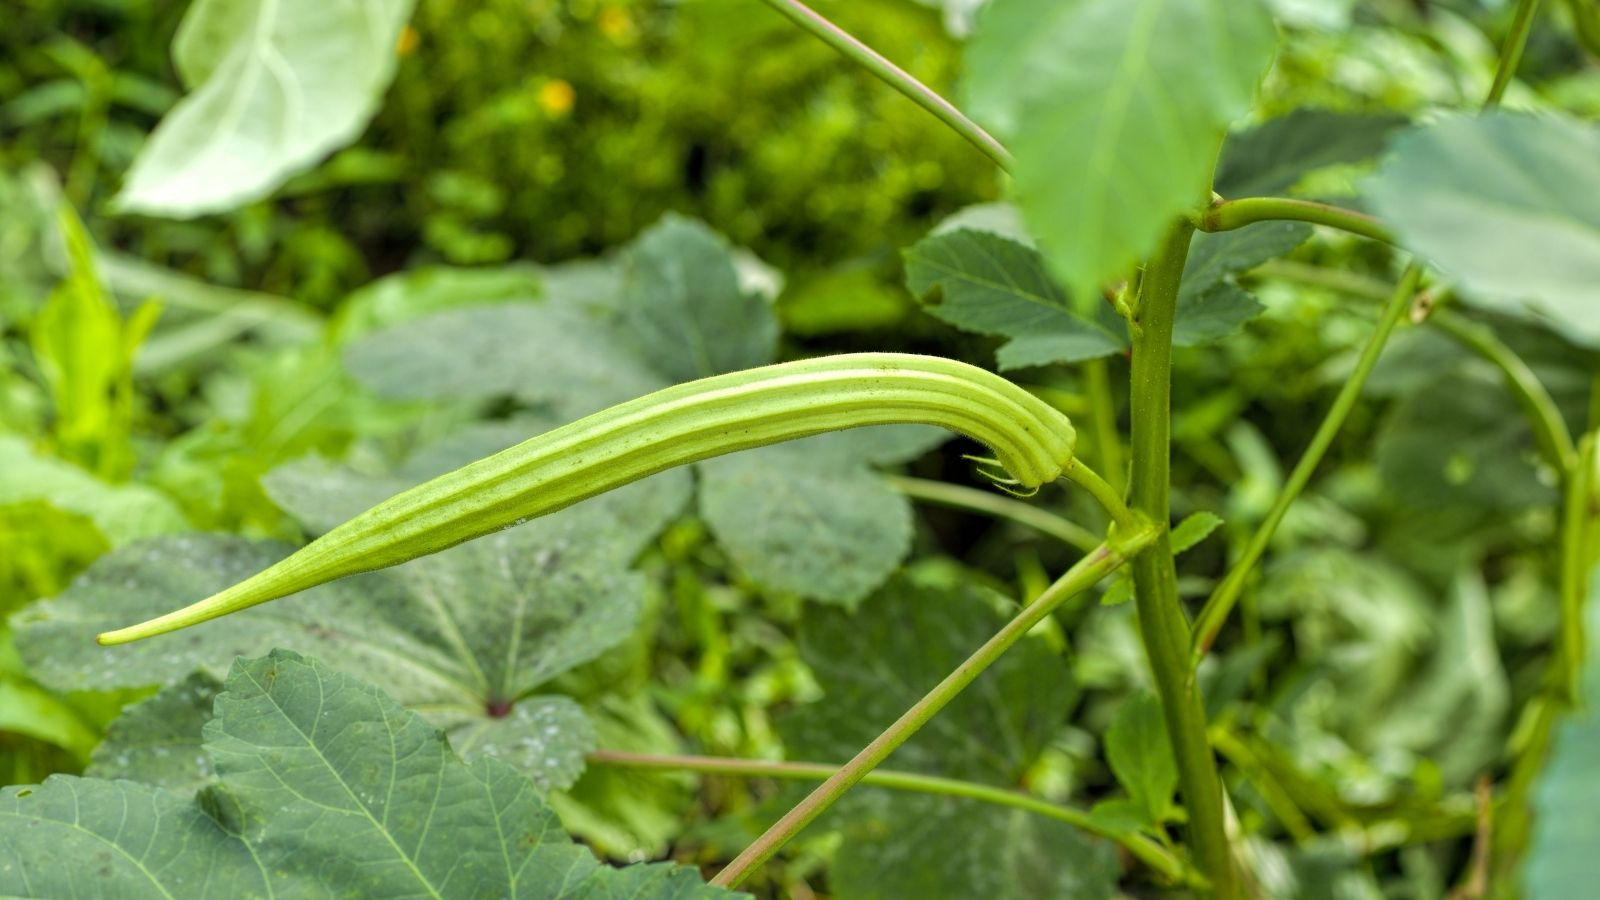 Give companion planting with okra a try today!
